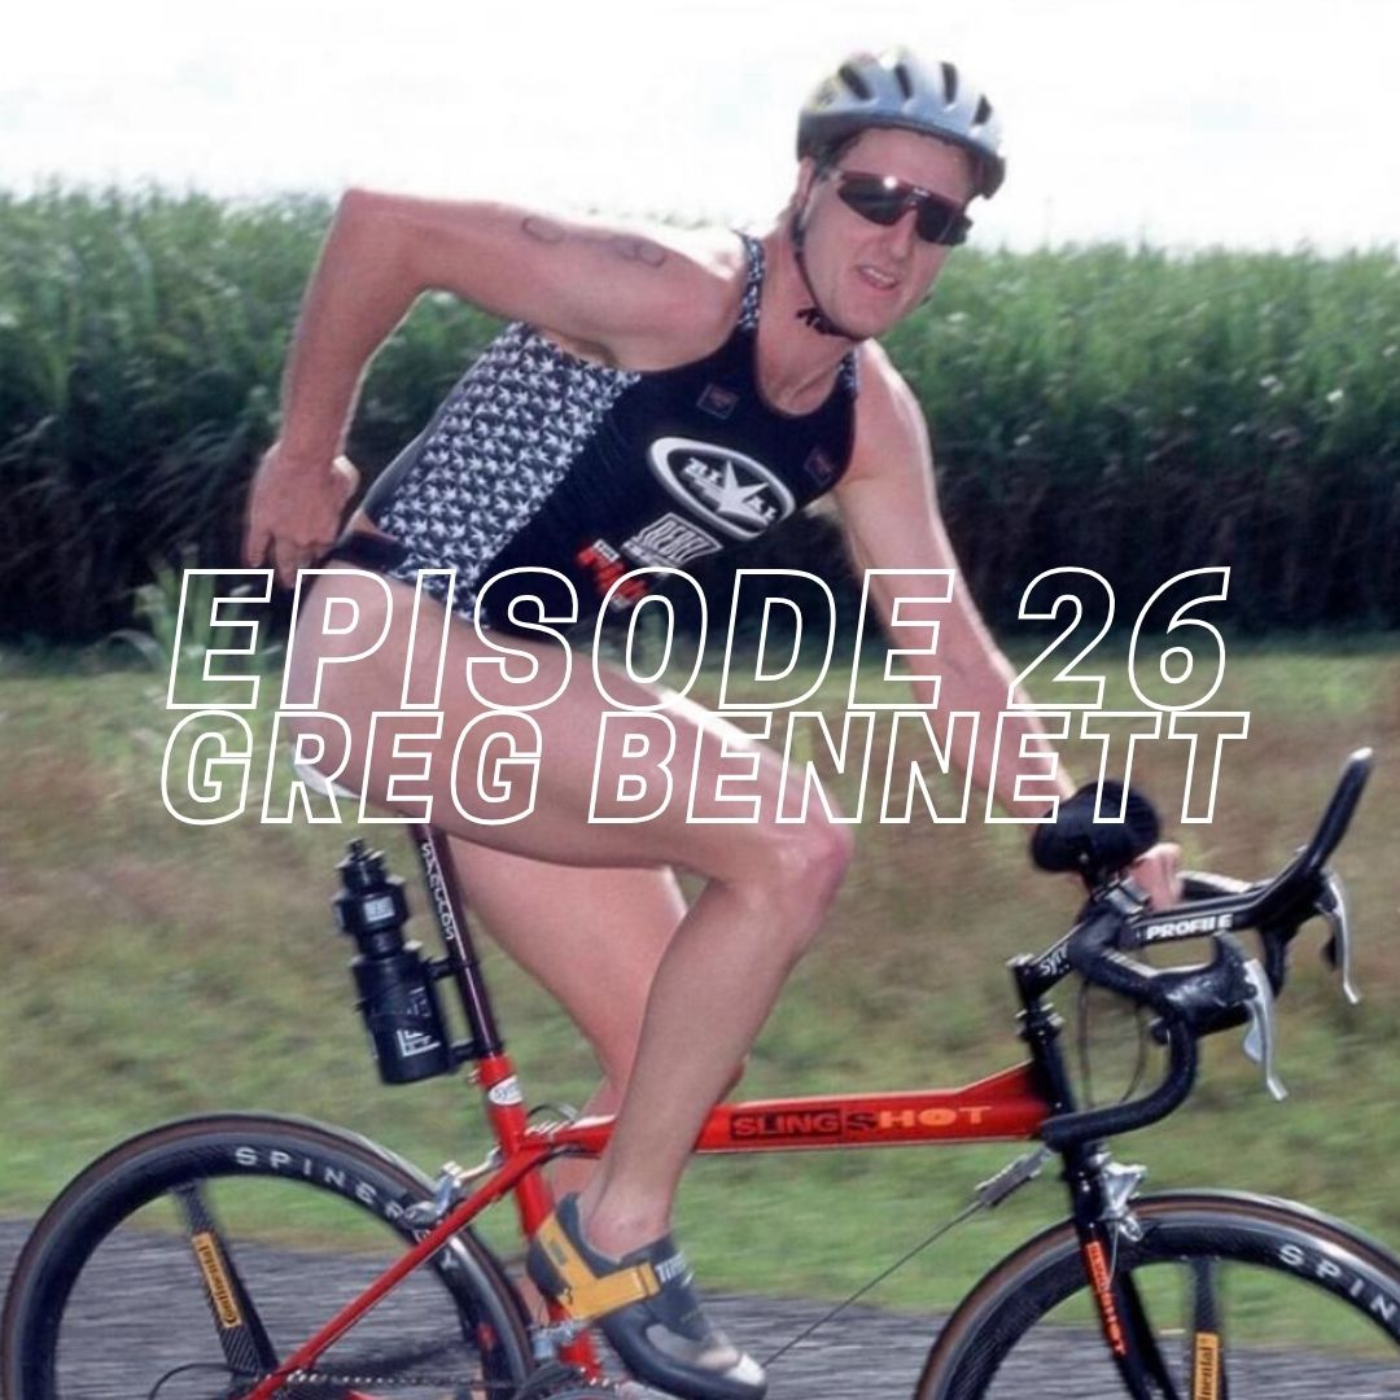 Greg Bennett chats with Reedy and Clint on the Olympics, Surf Ironman, worst racing stories, Enhanced Games, PTO v Ironman, Kona, managers in triathlon and keeping a winning mindset